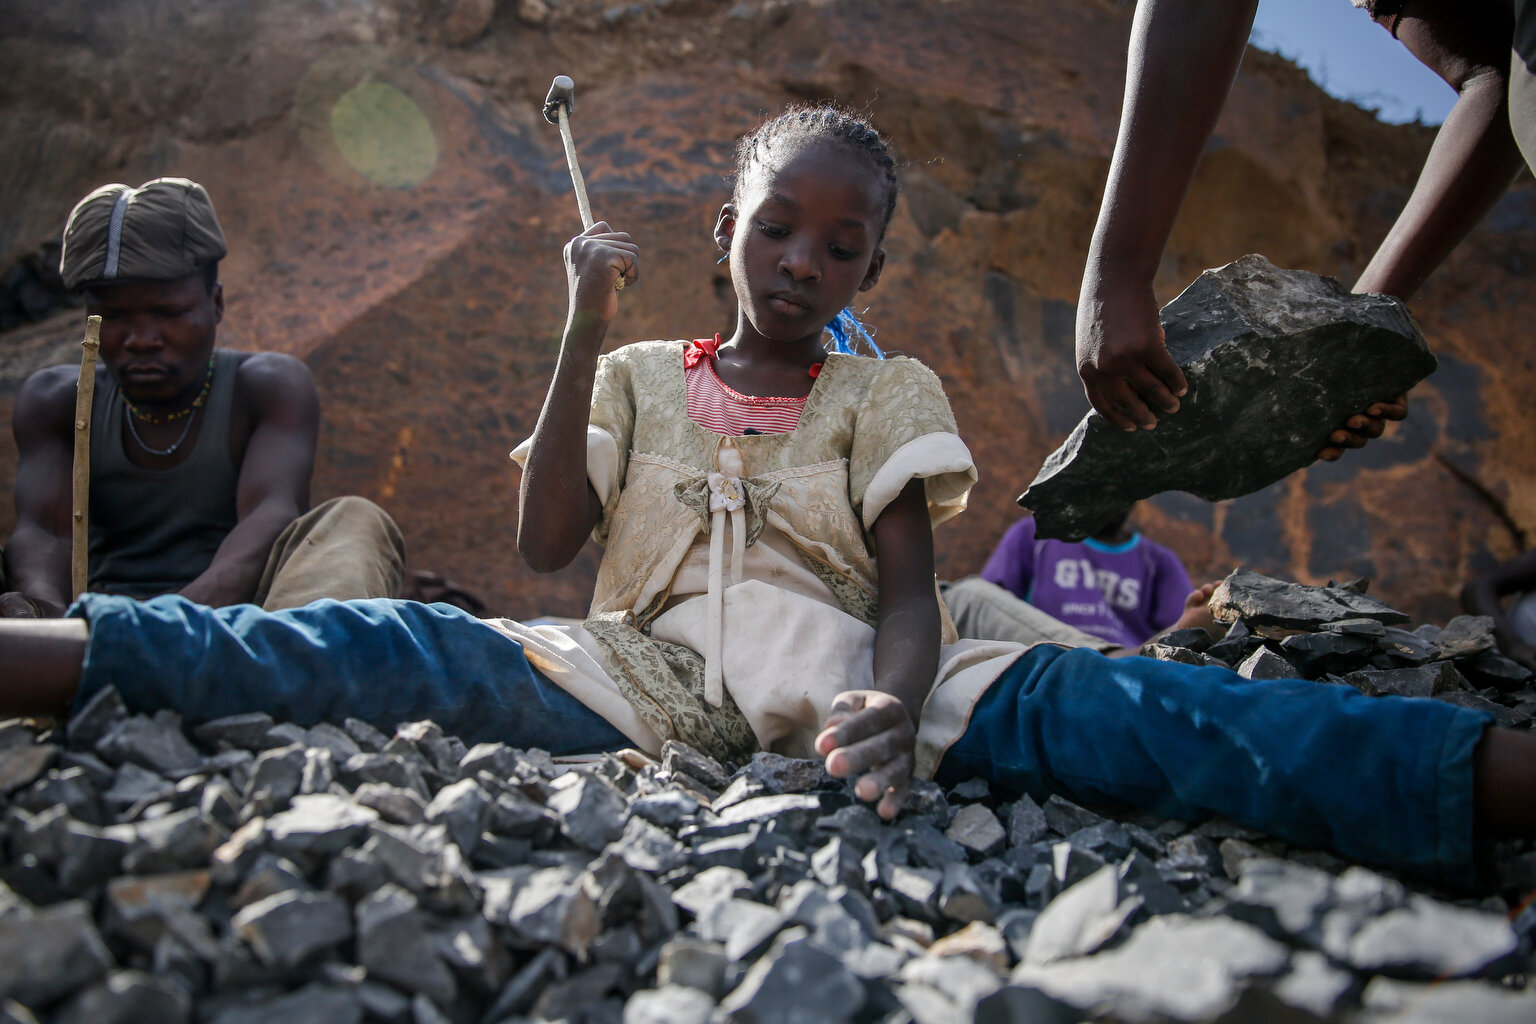  Irene Wanzila, 10, works breaking rocks with a hammer along with her younger brother, older sister and mother, who says she was left without a choice after she lost her cleaning job at a private school when coronavirus pandemic restrictions were imp